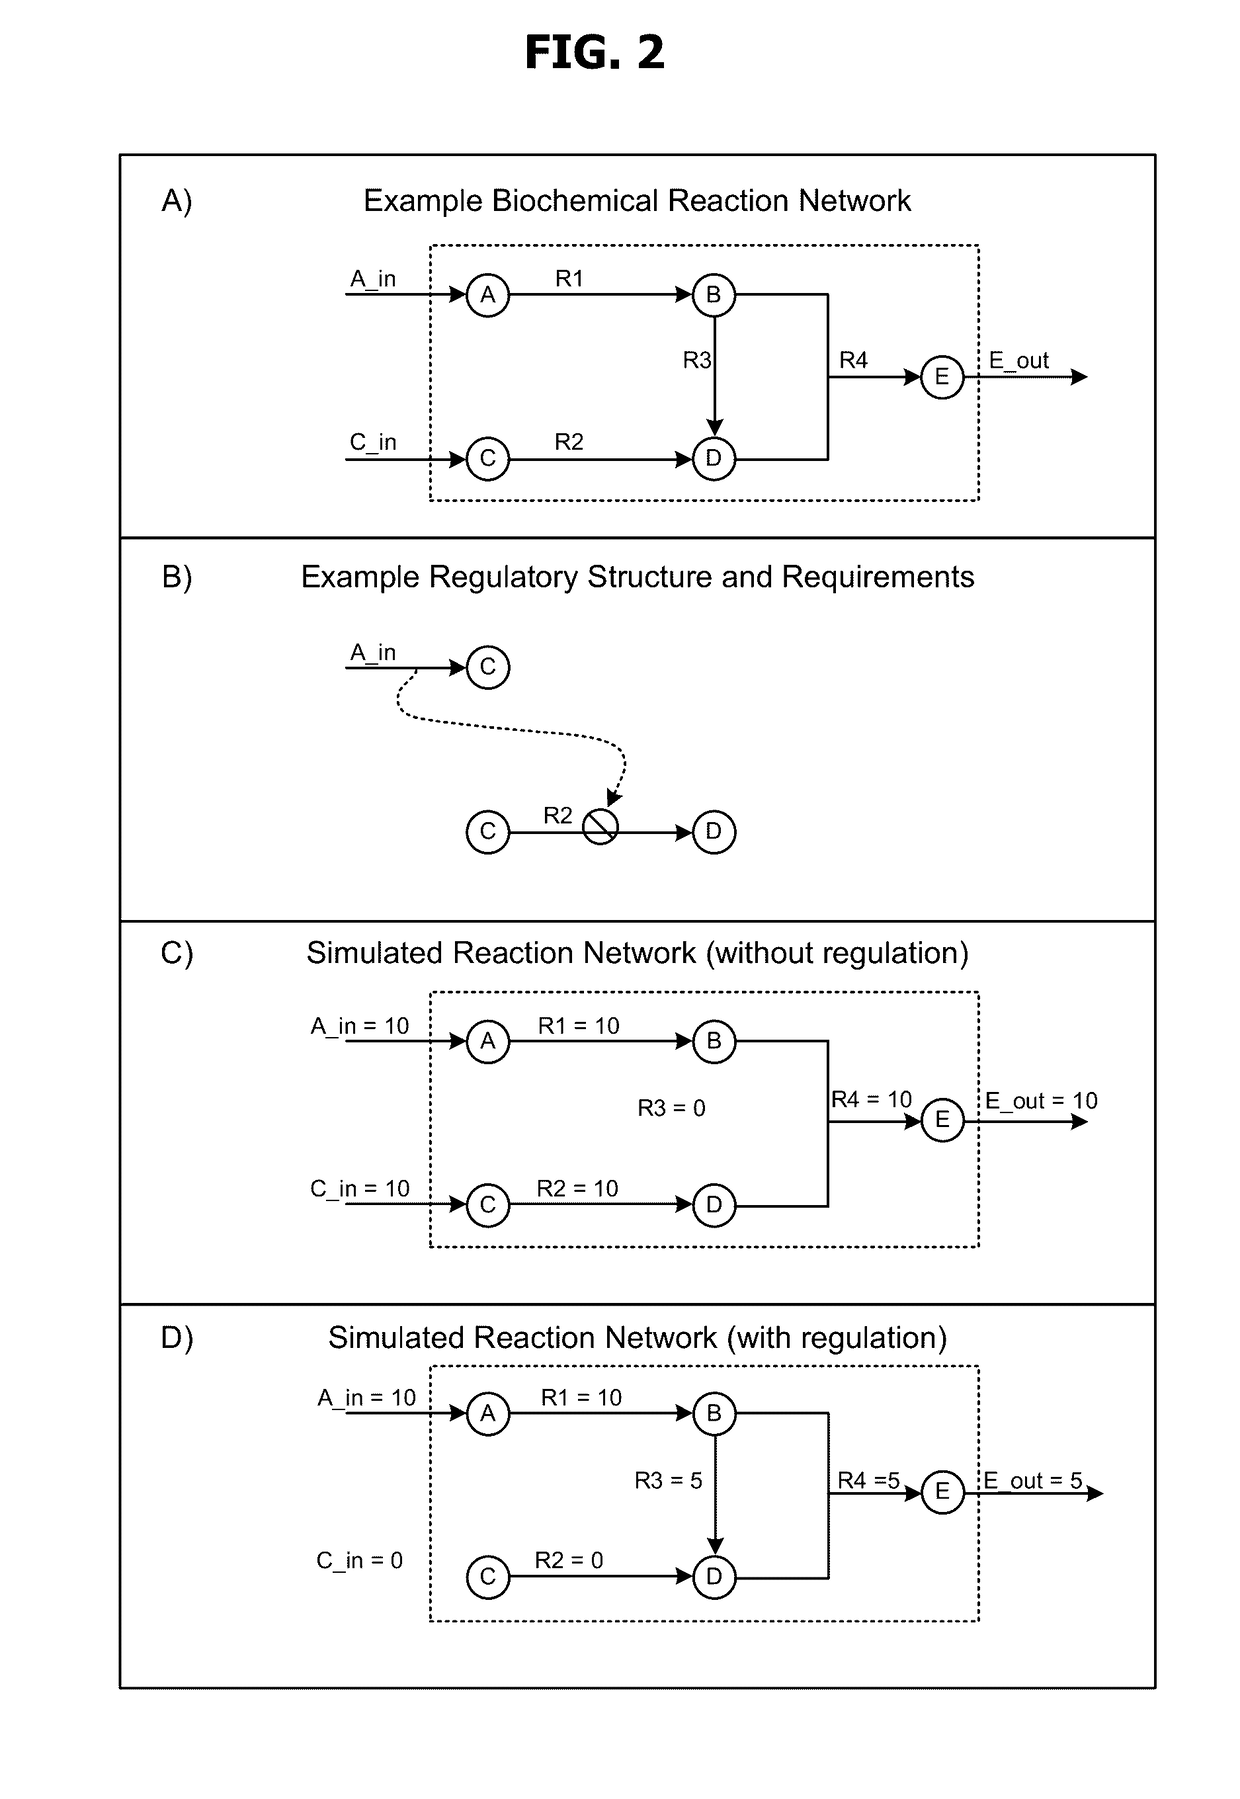 Models and methods for determining systemic properties of regulated reaction networks